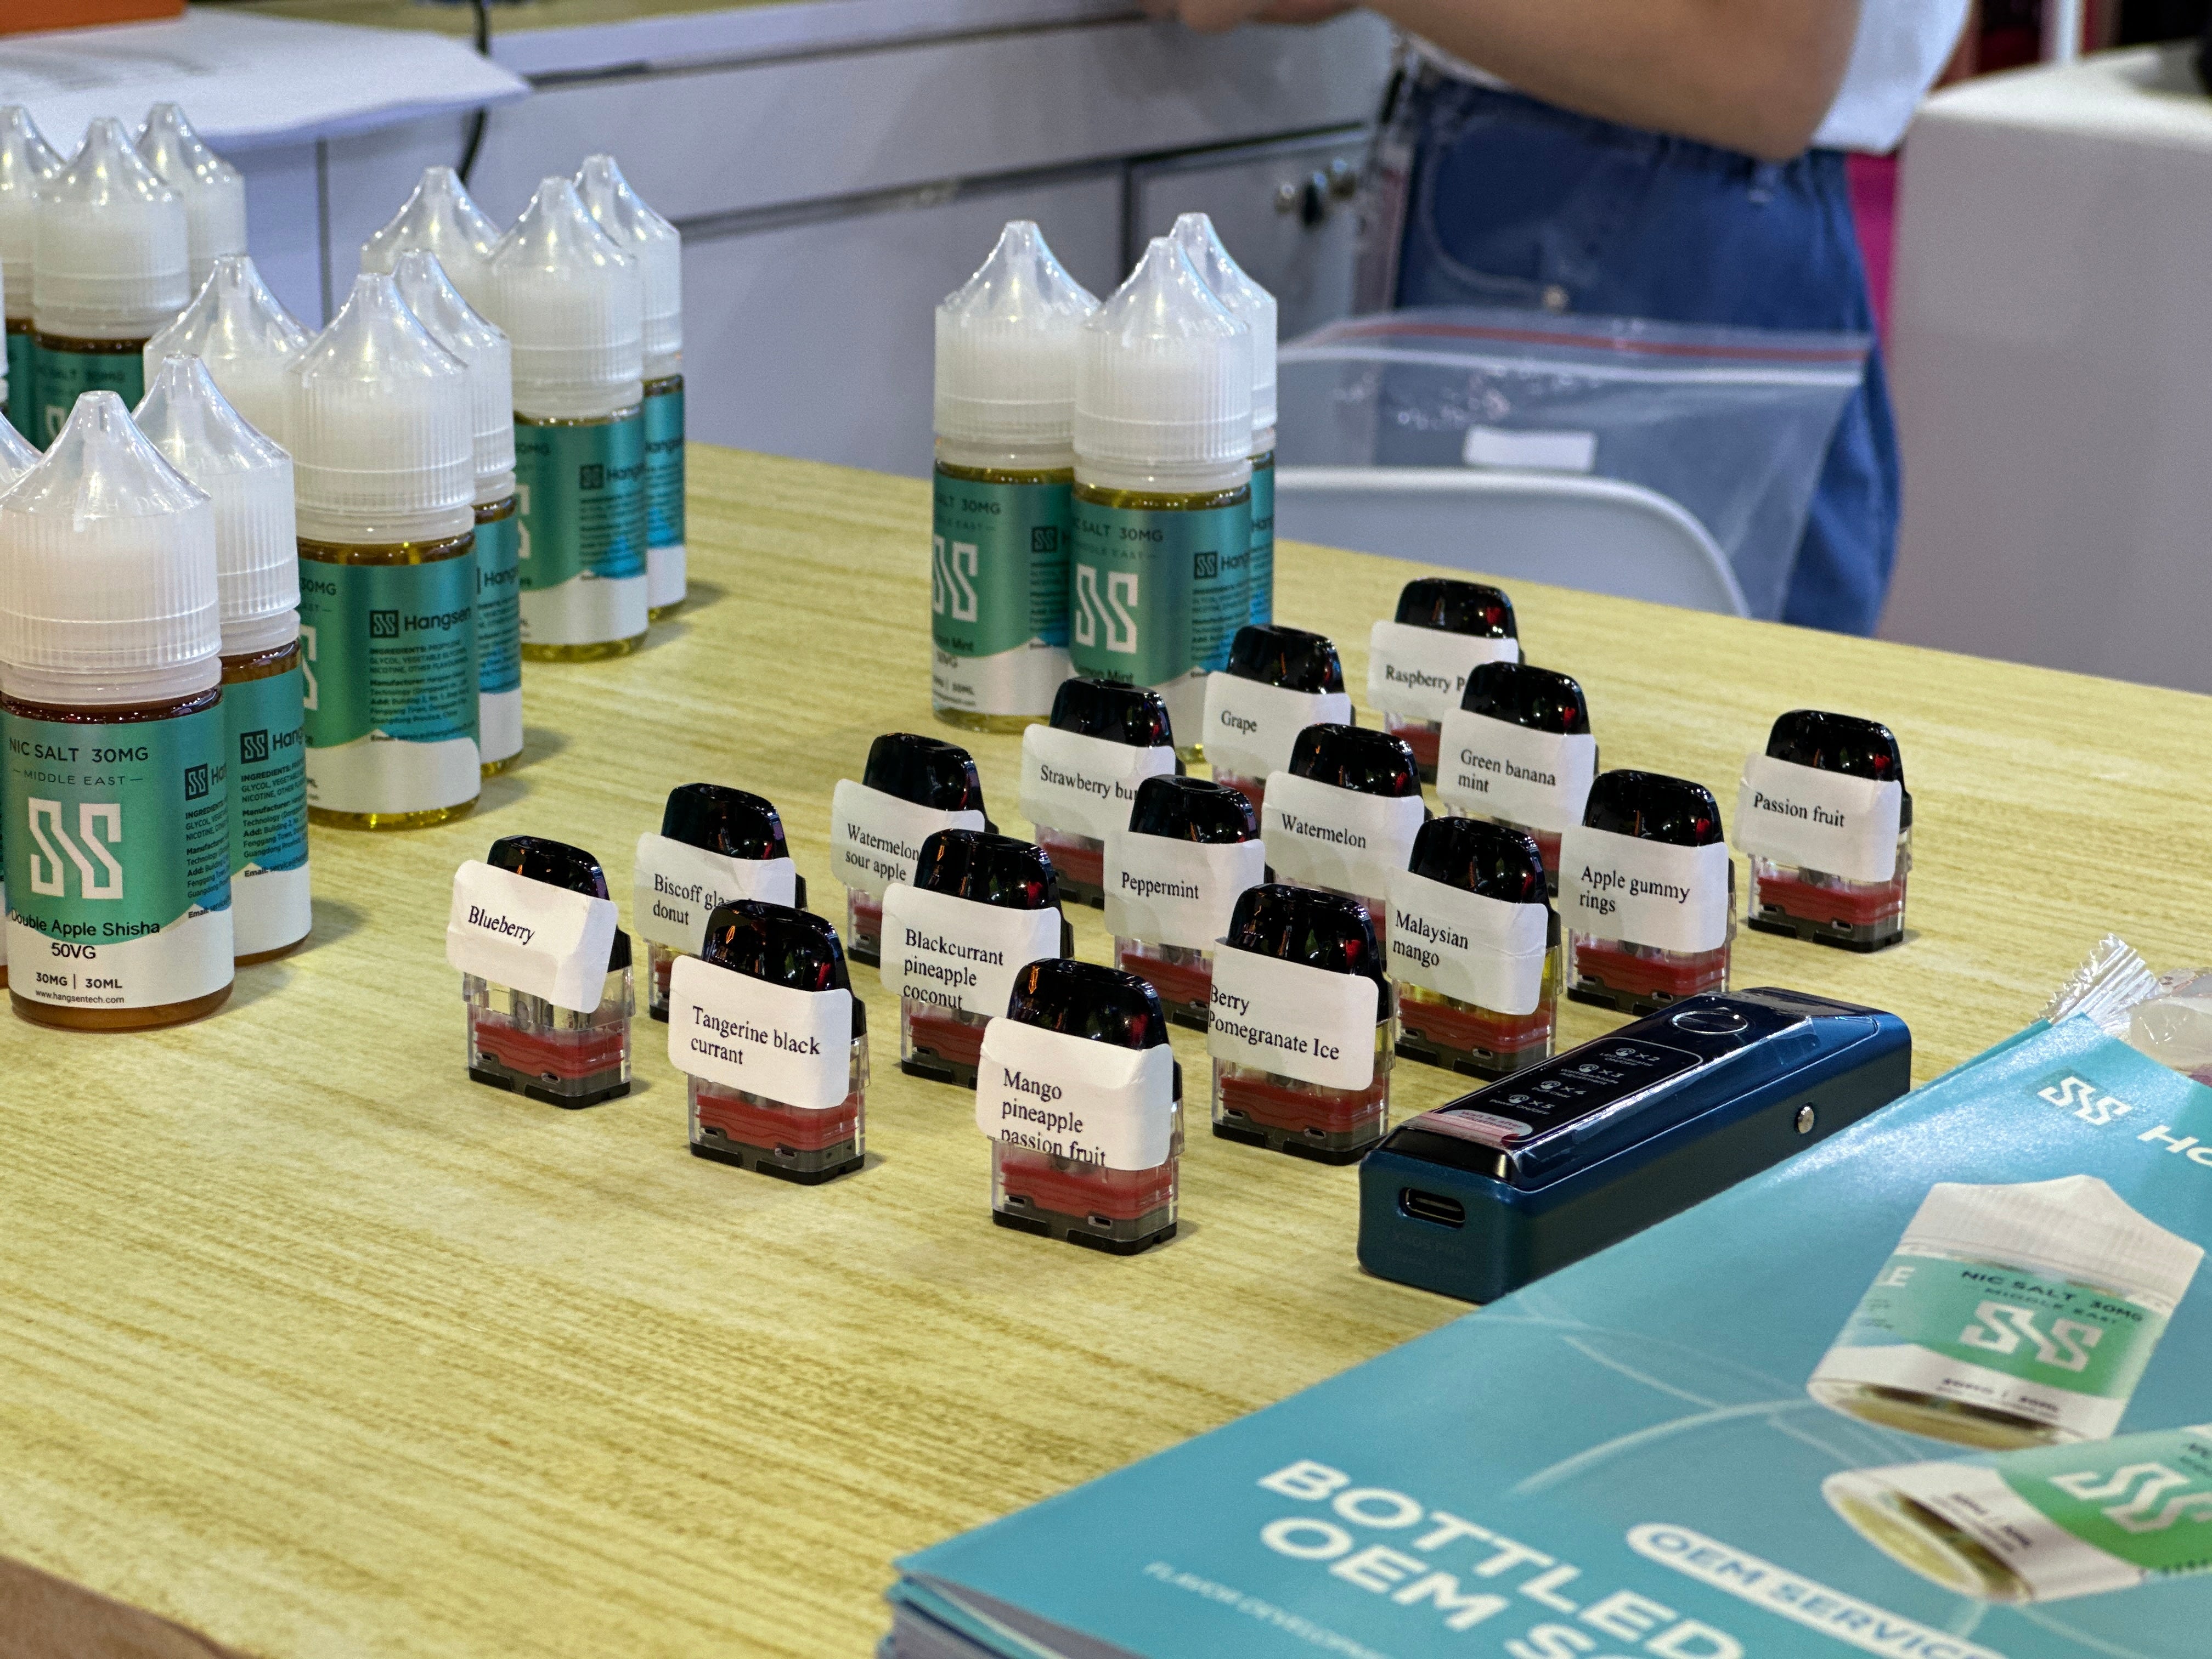 Here's a picture of hangsen's e-liquid flavors on display at the World vape show.